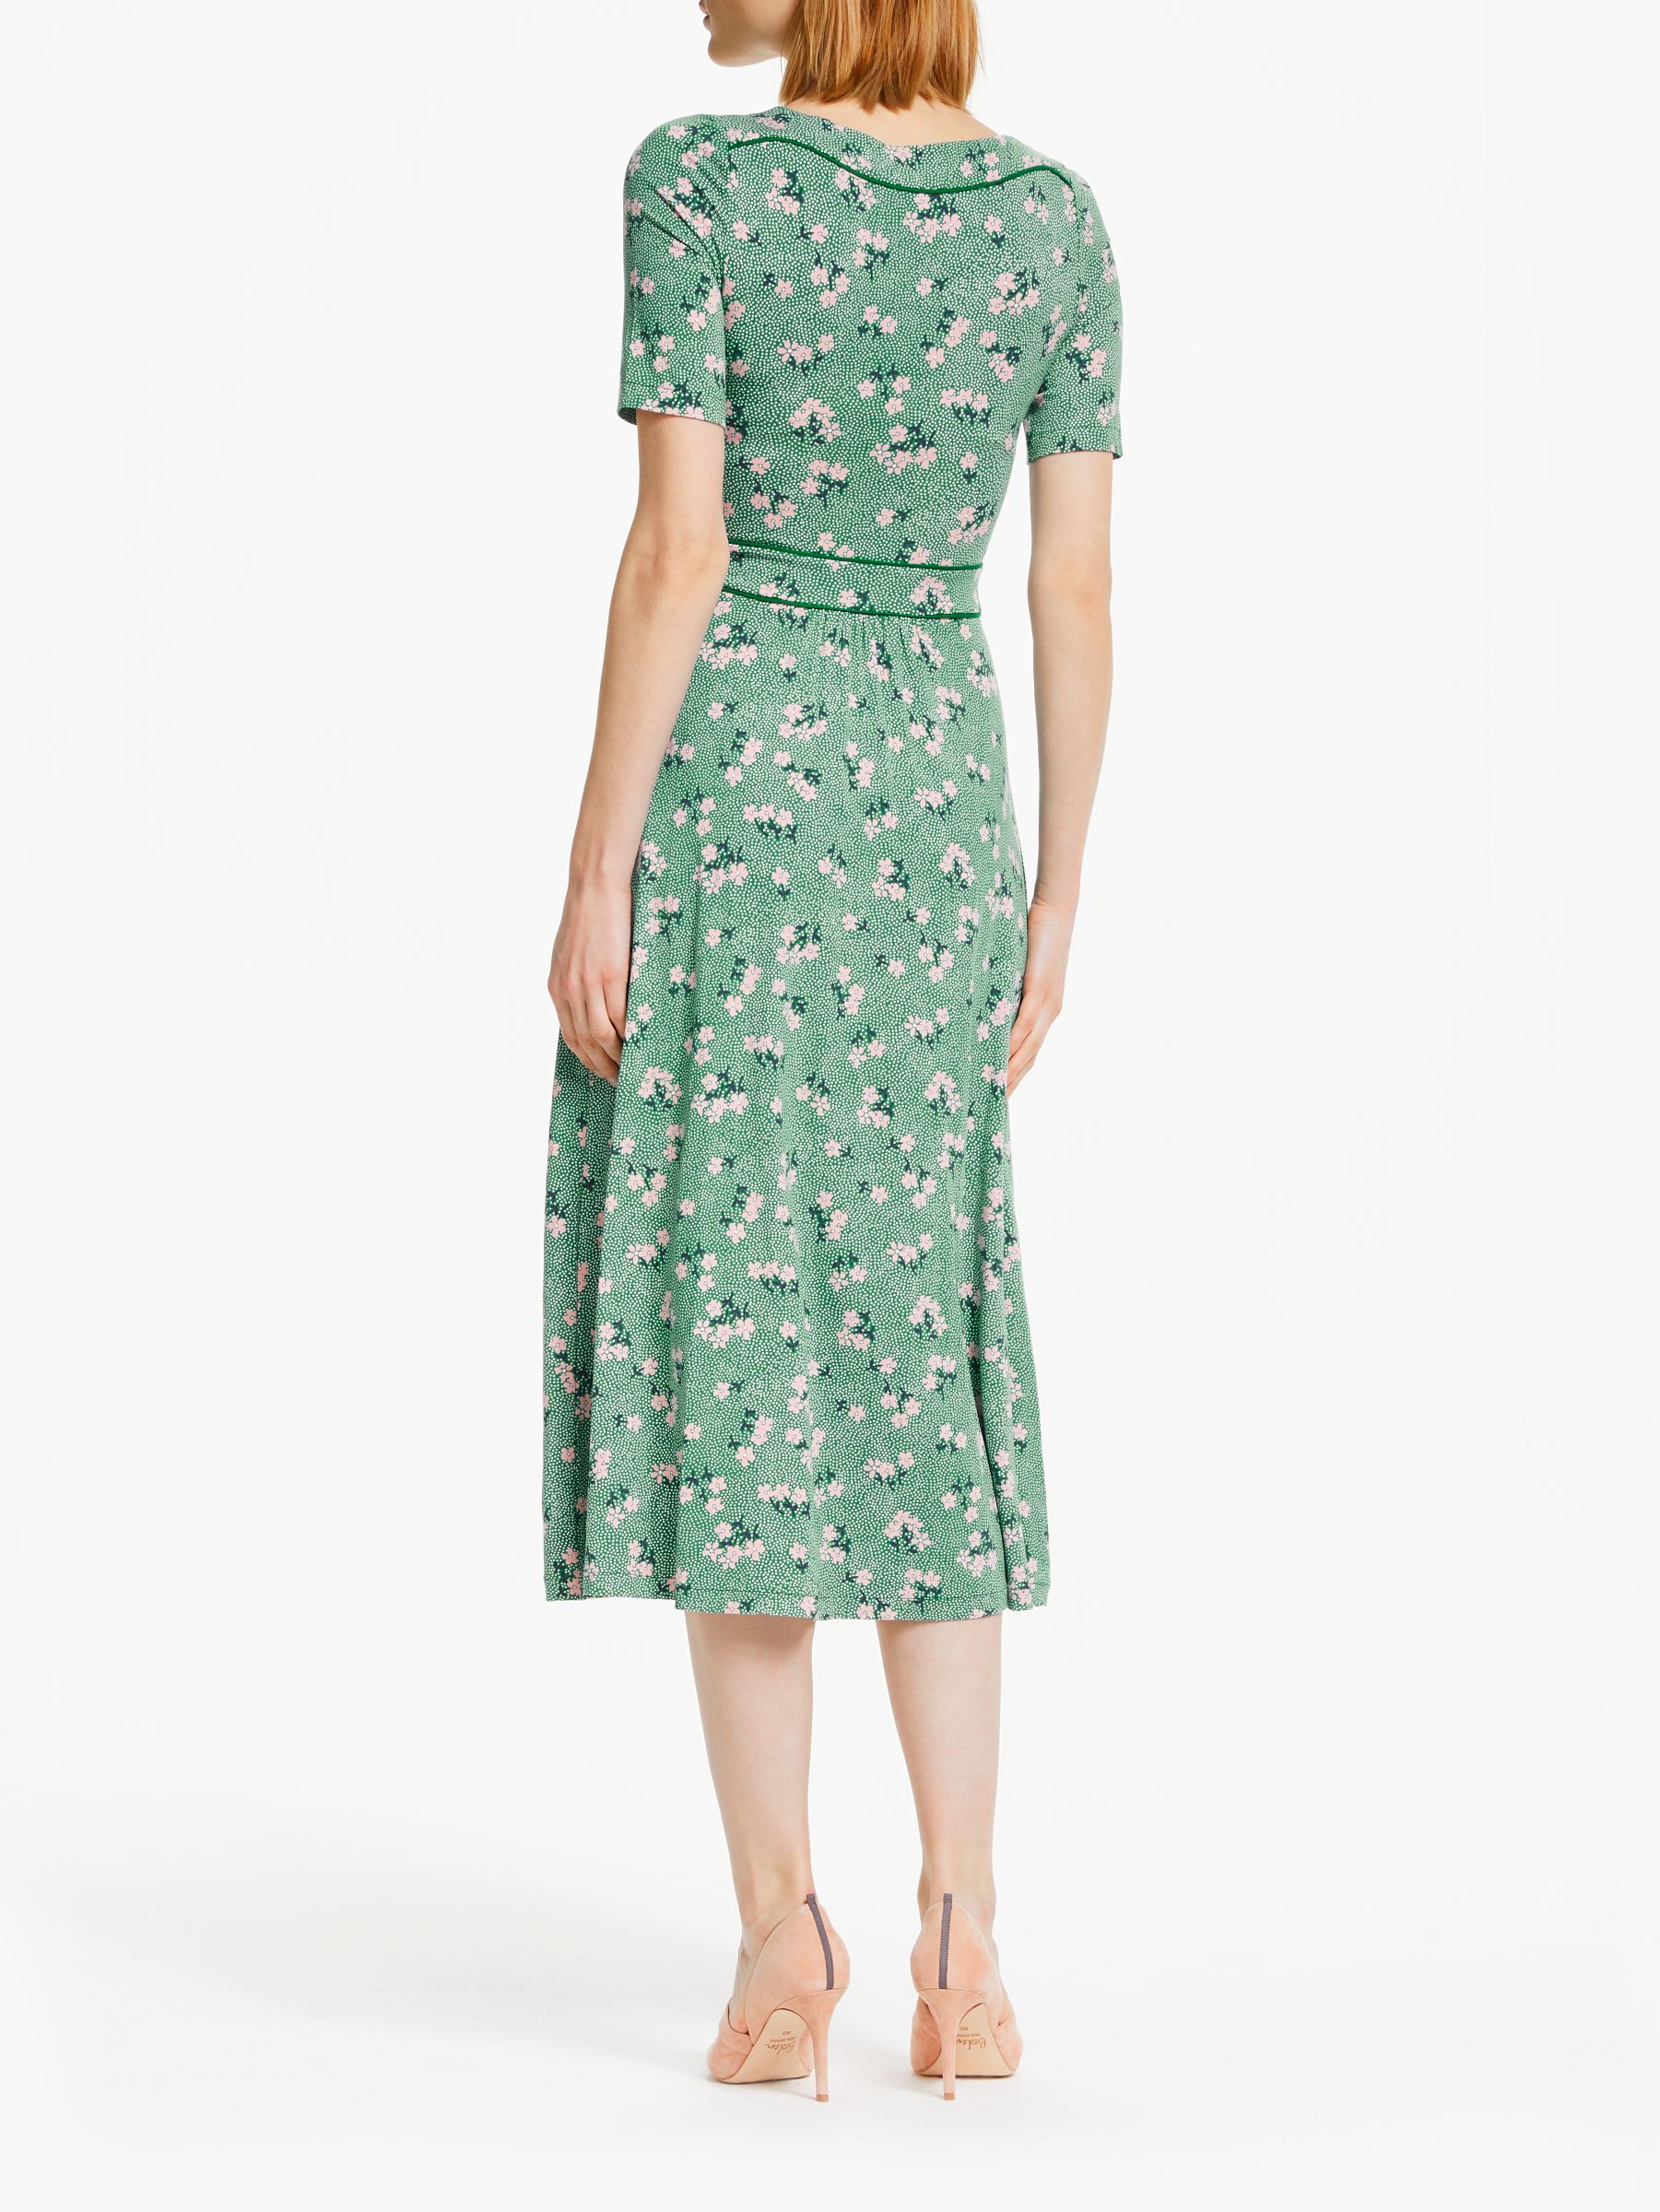 Boden Ava Floral Spot Midi Dress, Forest Green/Chalky Pink